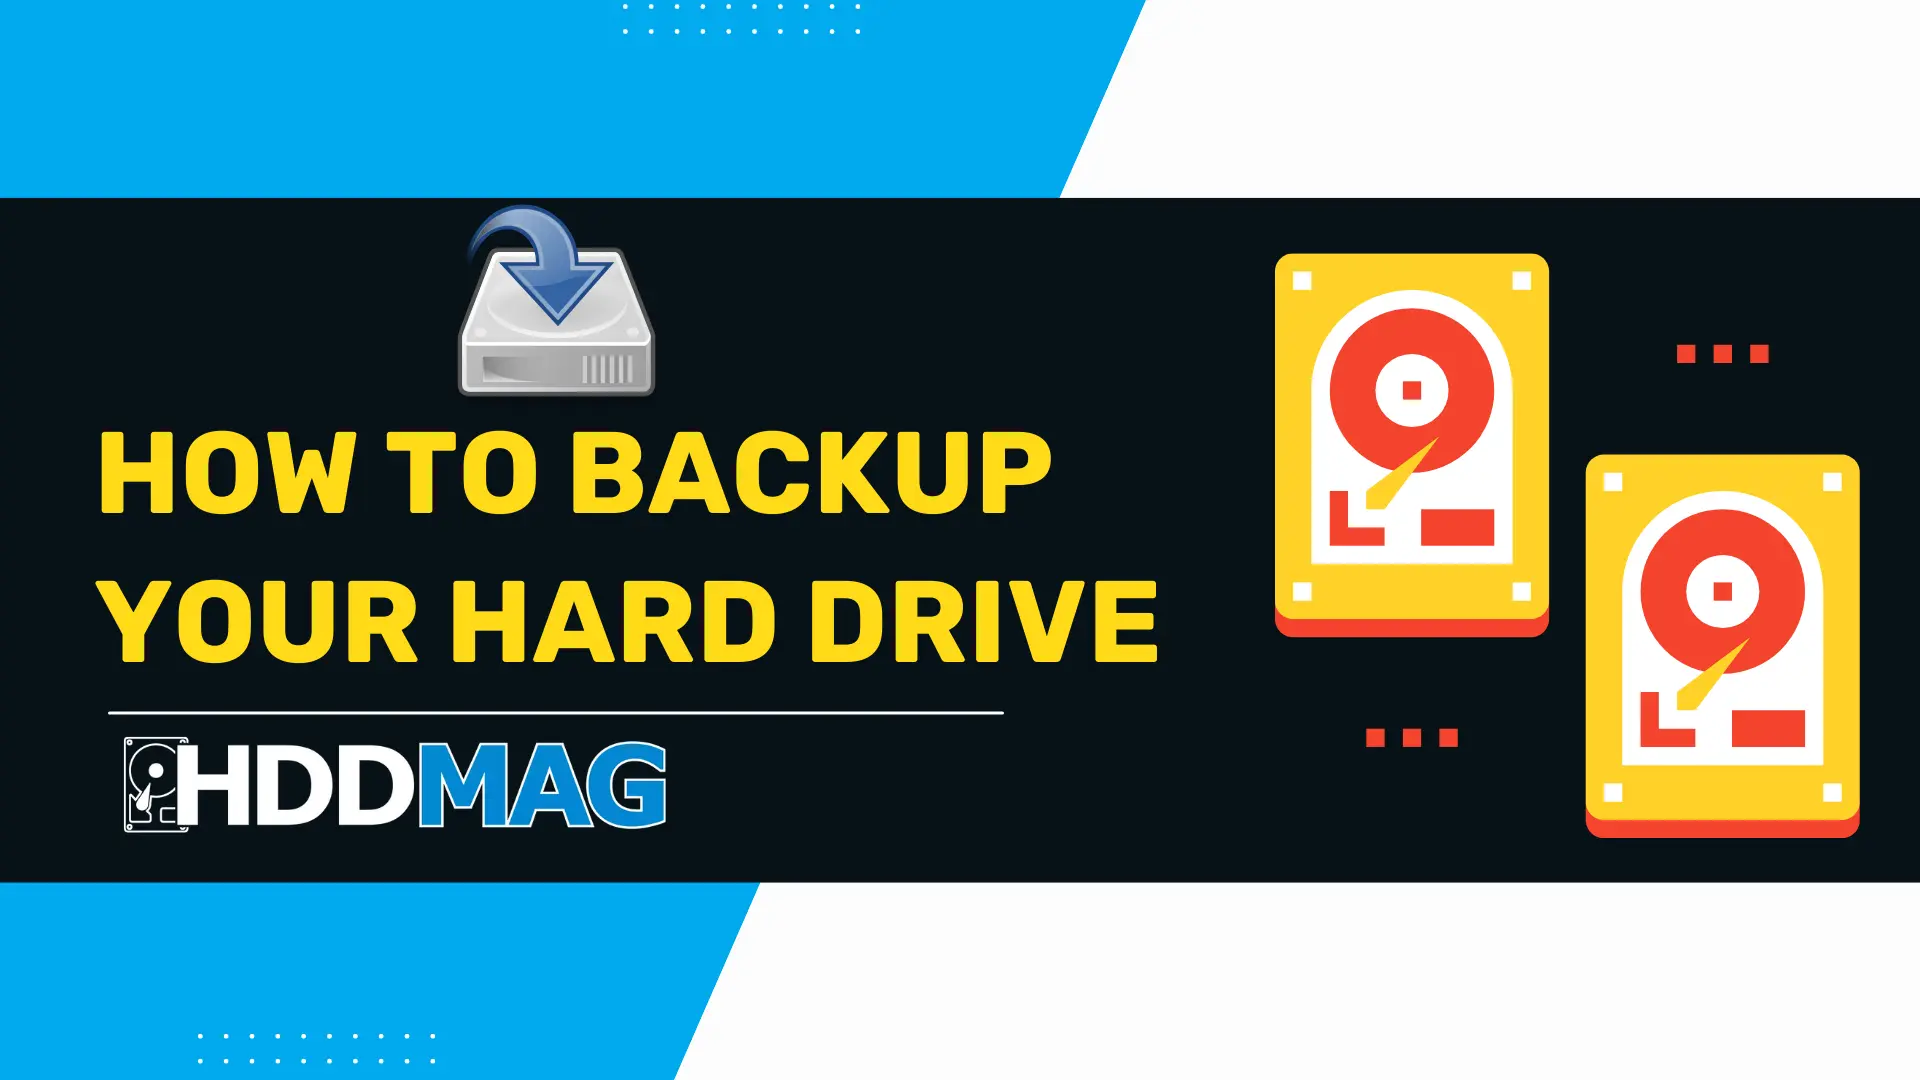 How To Backup Your Hard Drive